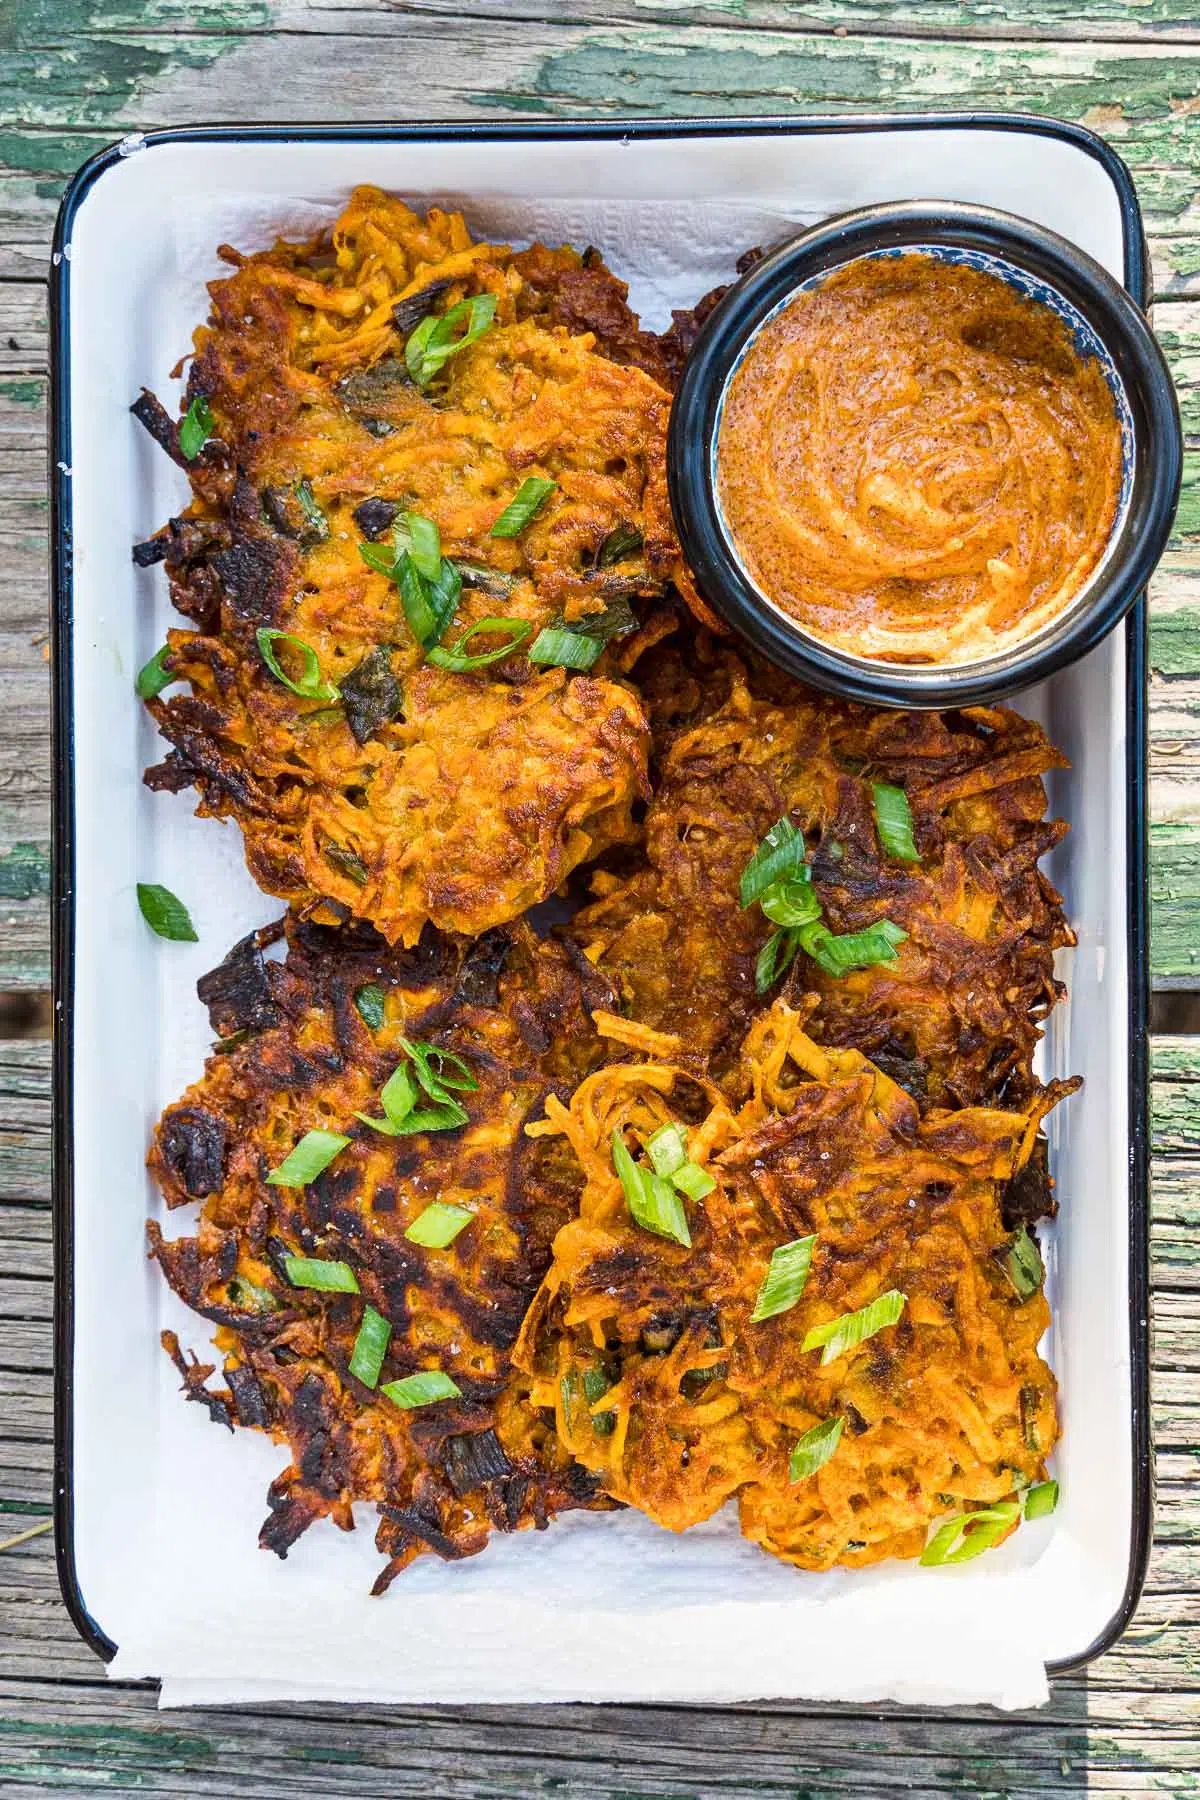 Sweet potato fritters in a rectangular serving dish